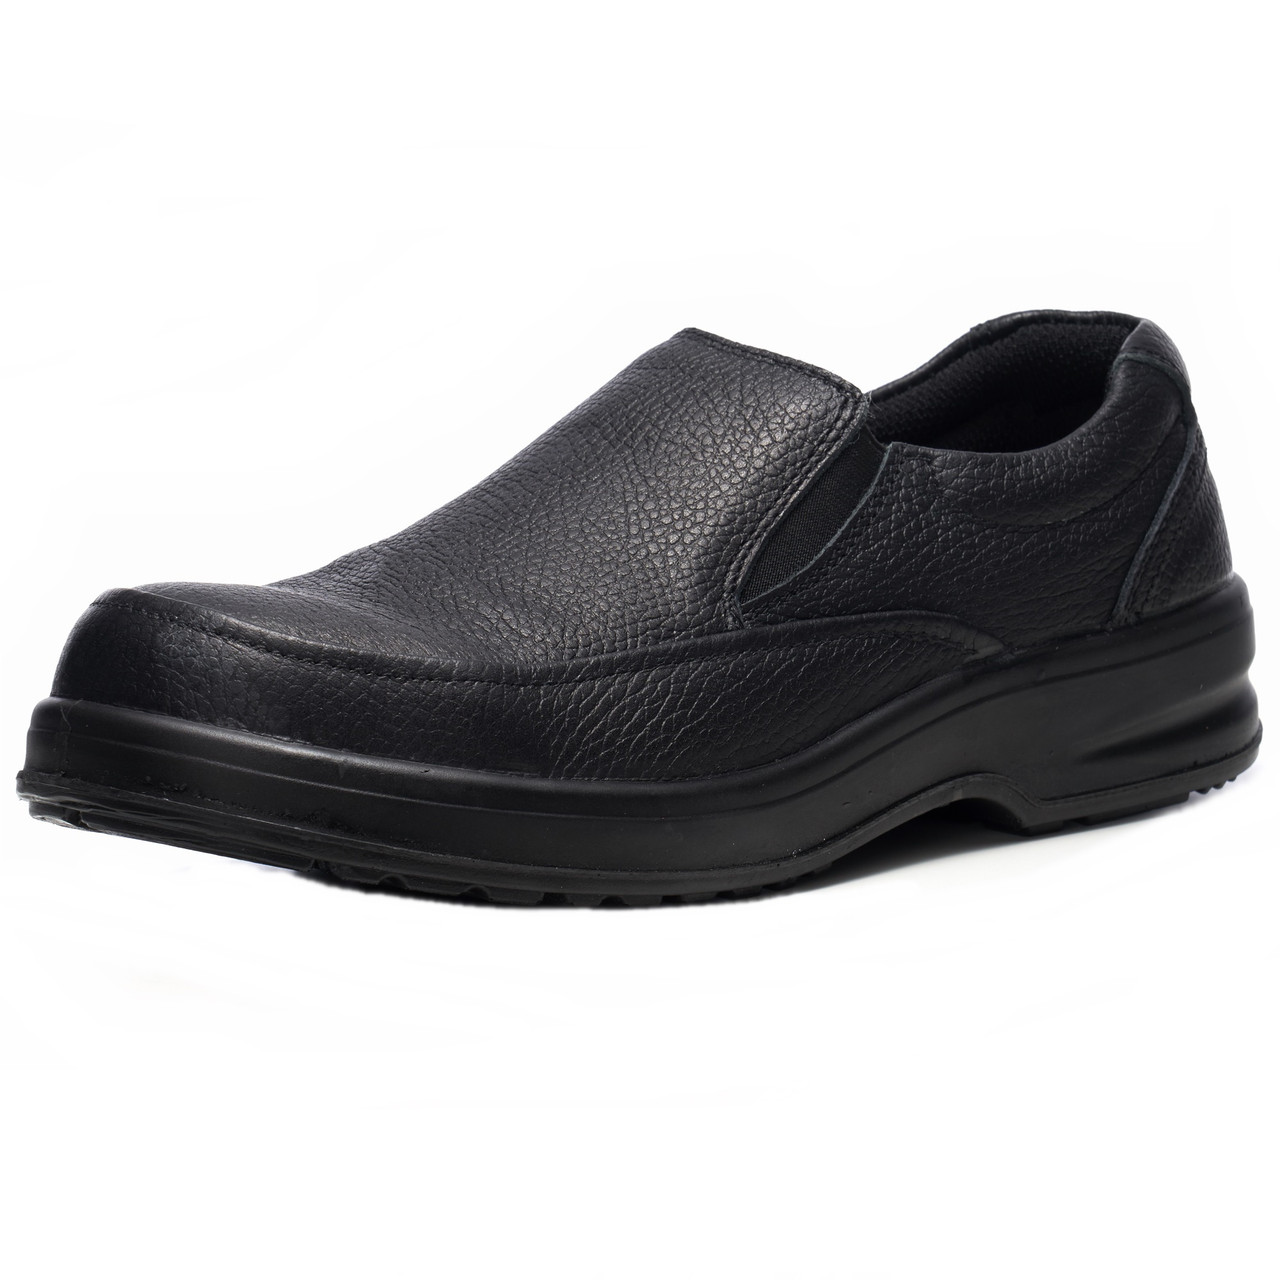 all leather slip resistant shoes